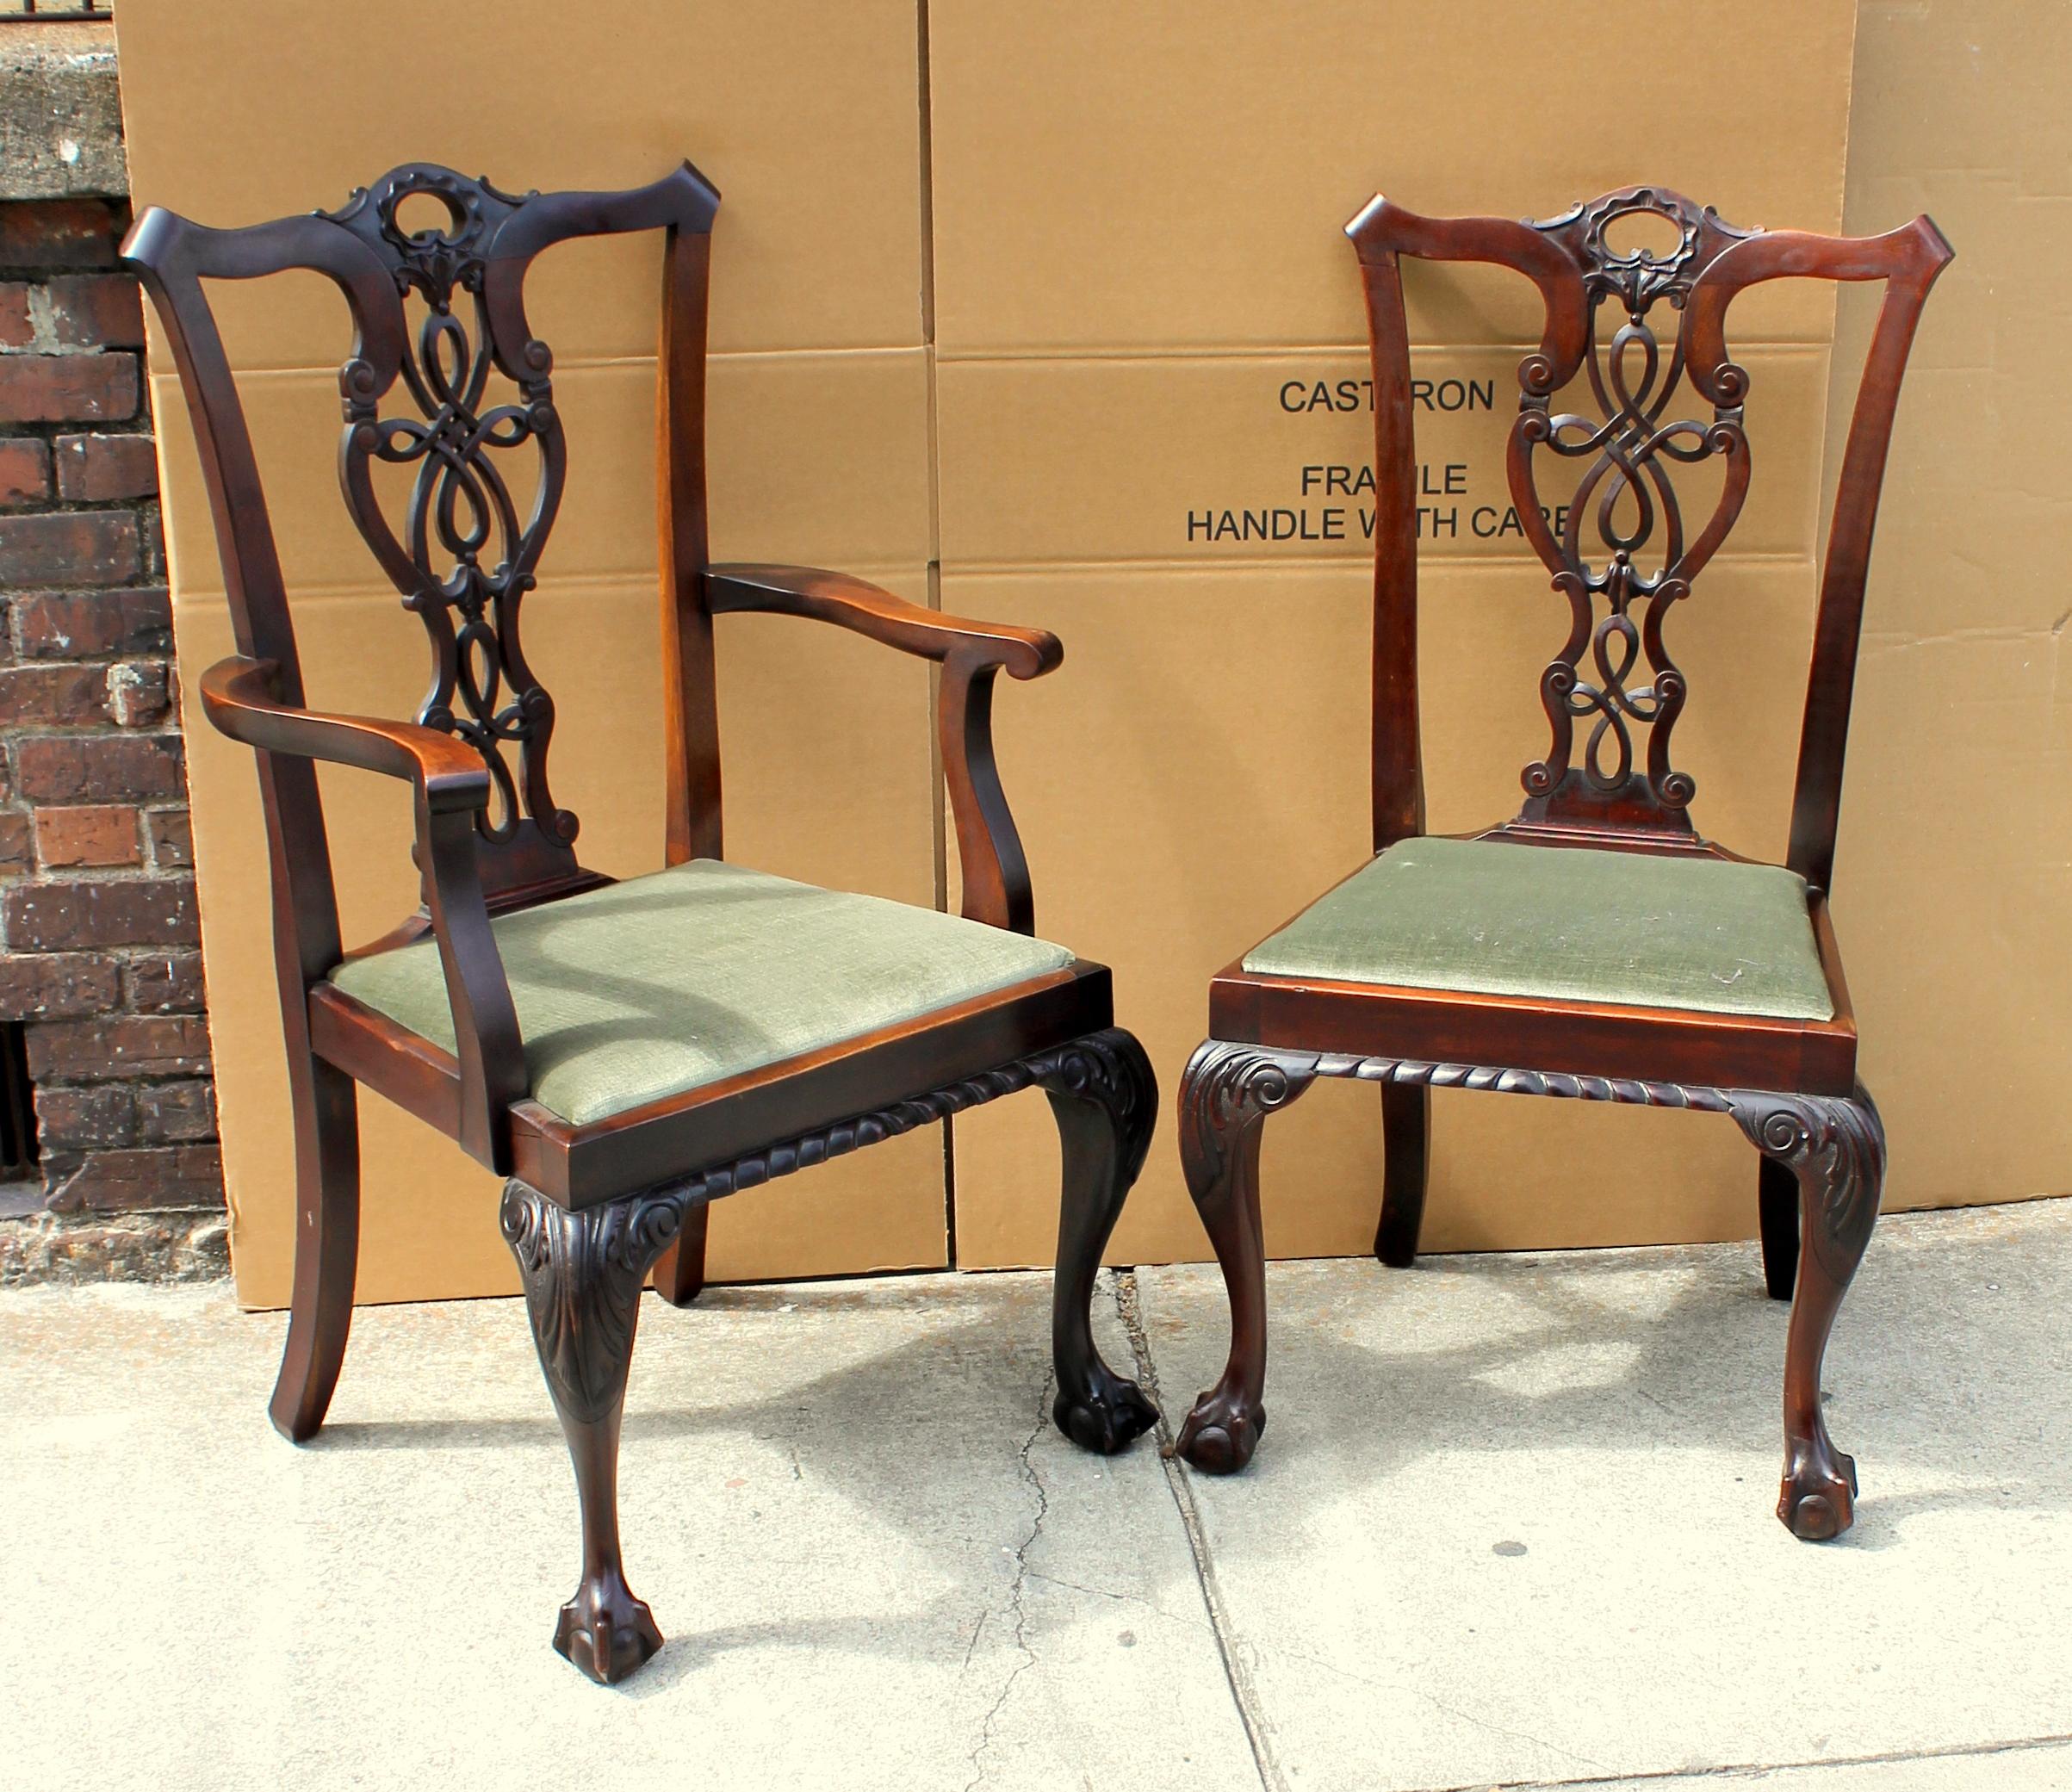 Fine quality set of 8 (2 arms, 6 sides) antique English hand carved solid mahogany Chippendale style dining chairs

Please note hand carved highly detailed 